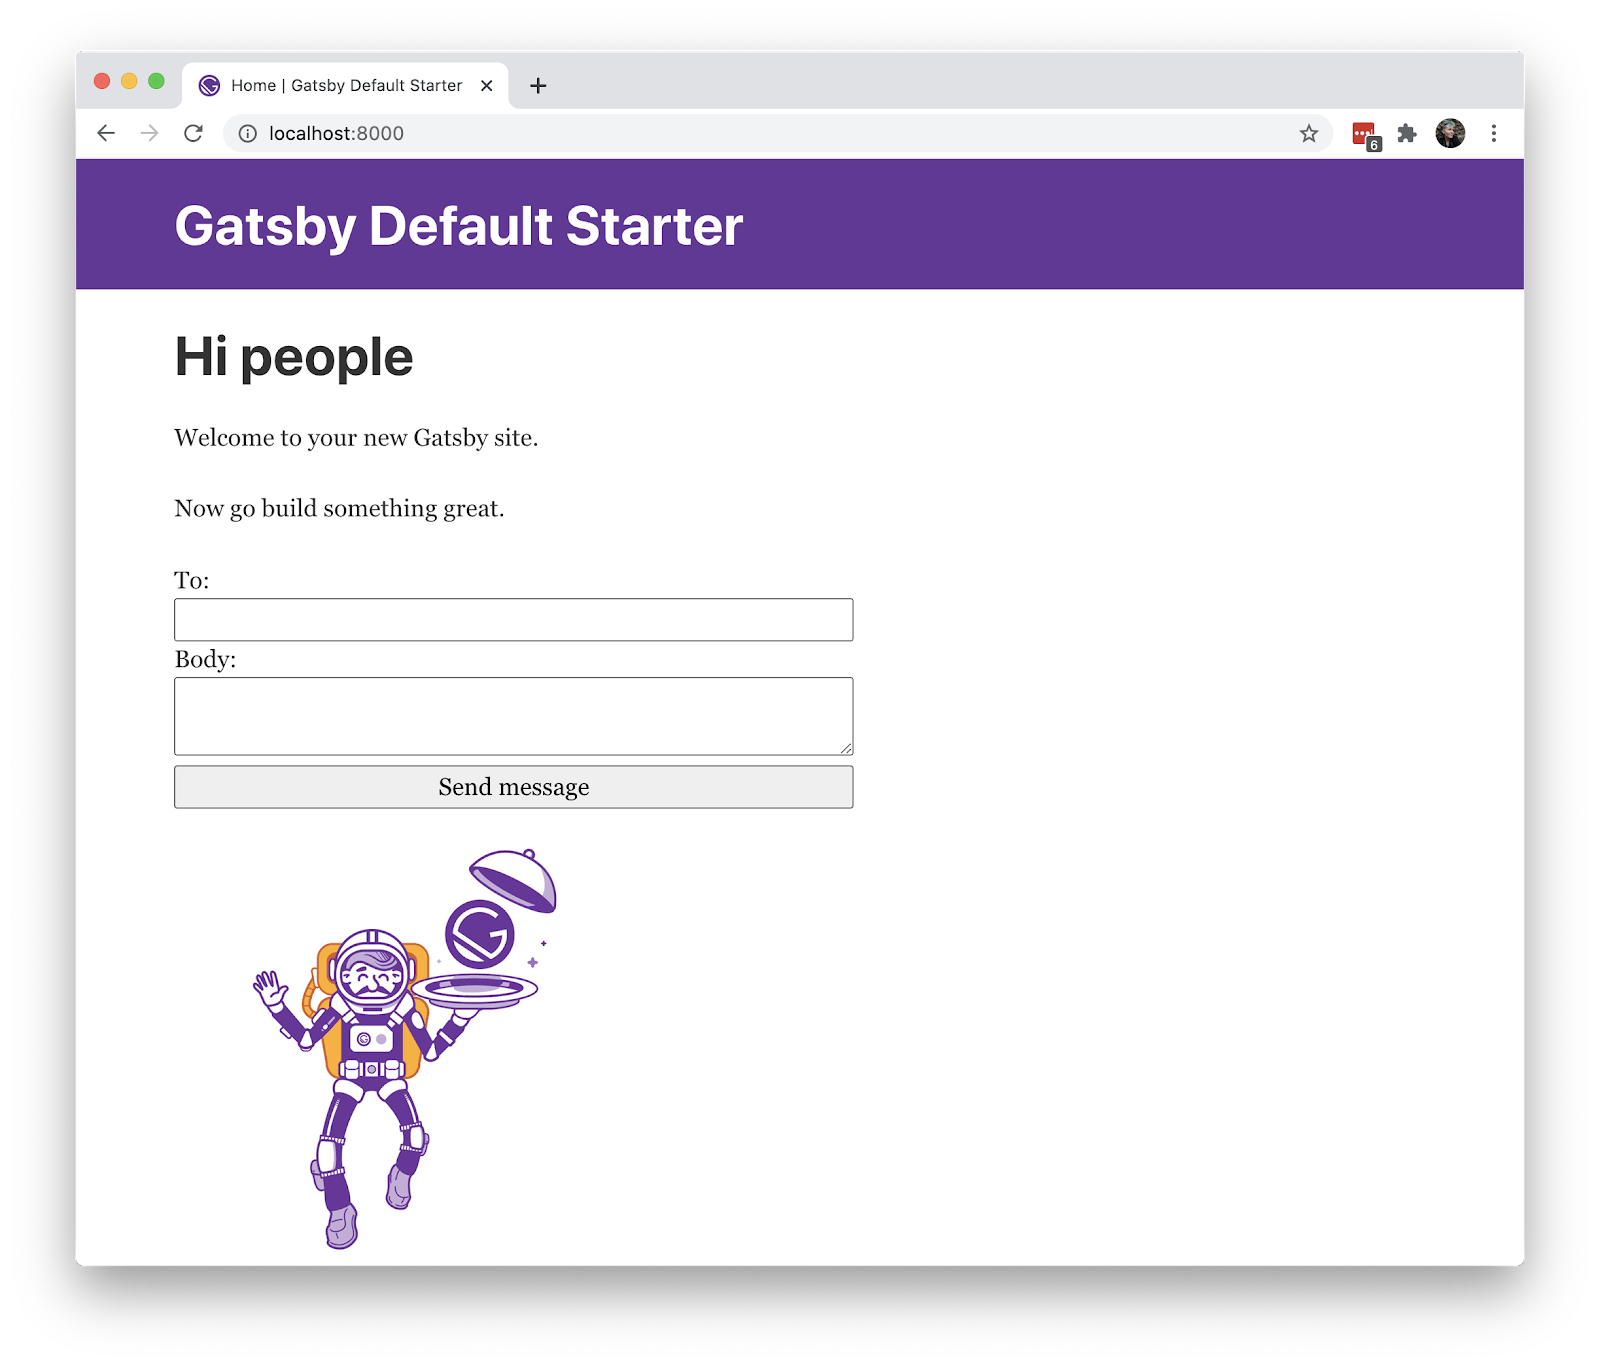 Screenshot of the Gatsby default starter project, plus a form to send a SMS message. The form has 2 fields: "To" and "Body", as well as a submit button.